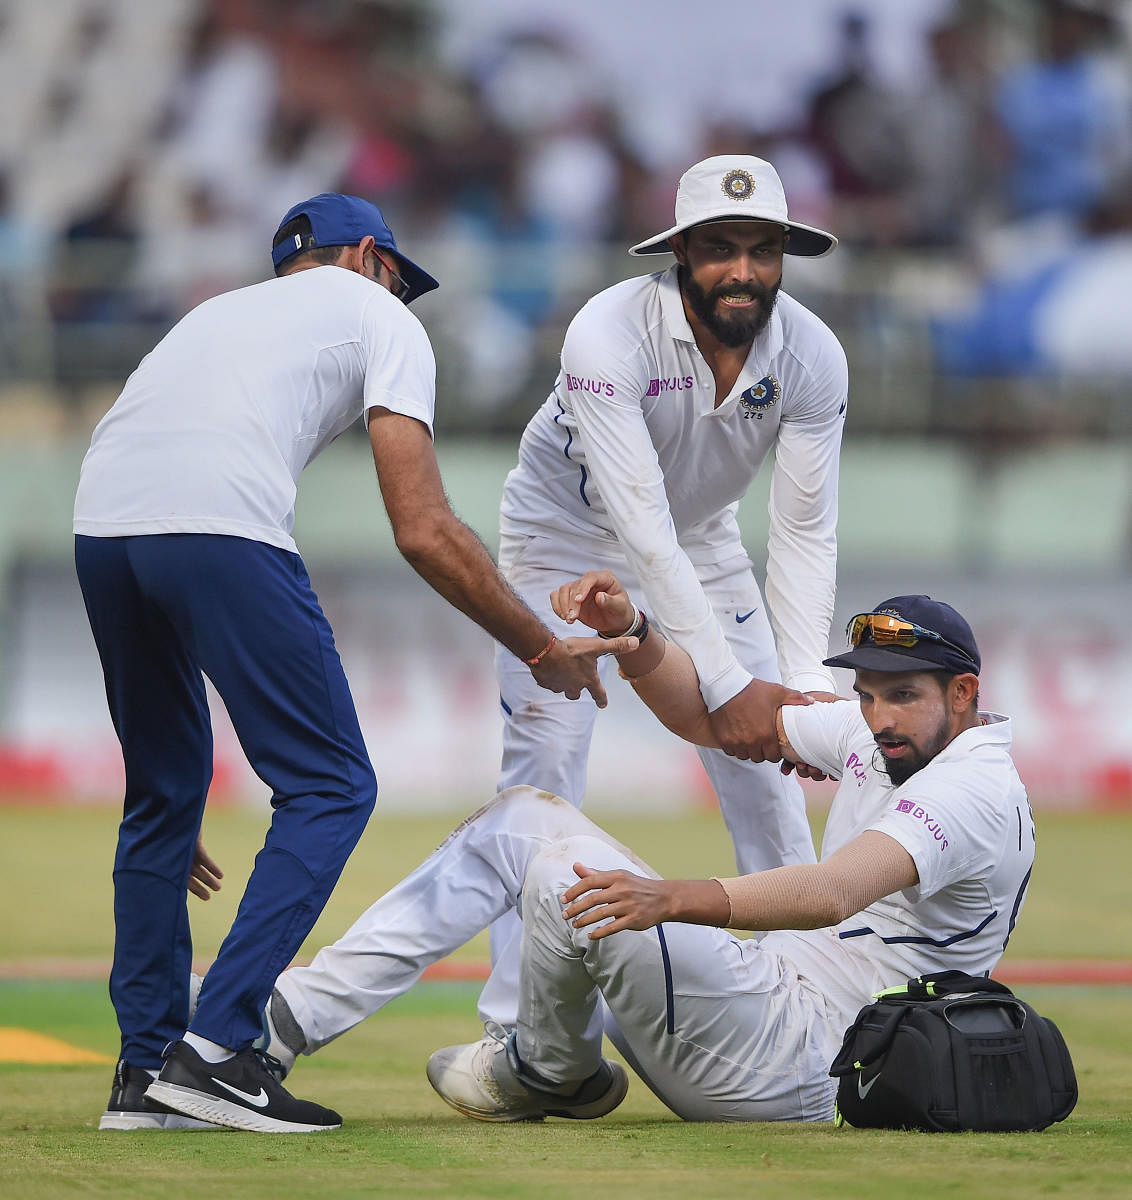 India's Ishant Sharma being helped after he suffered from an injury on third day of the 1st cricket test match between India and South Africa at Dr YS Rajasekhara Reddy ACA-VDCA Cricket Stadium, in Visakhapatnam. (PTI photo)